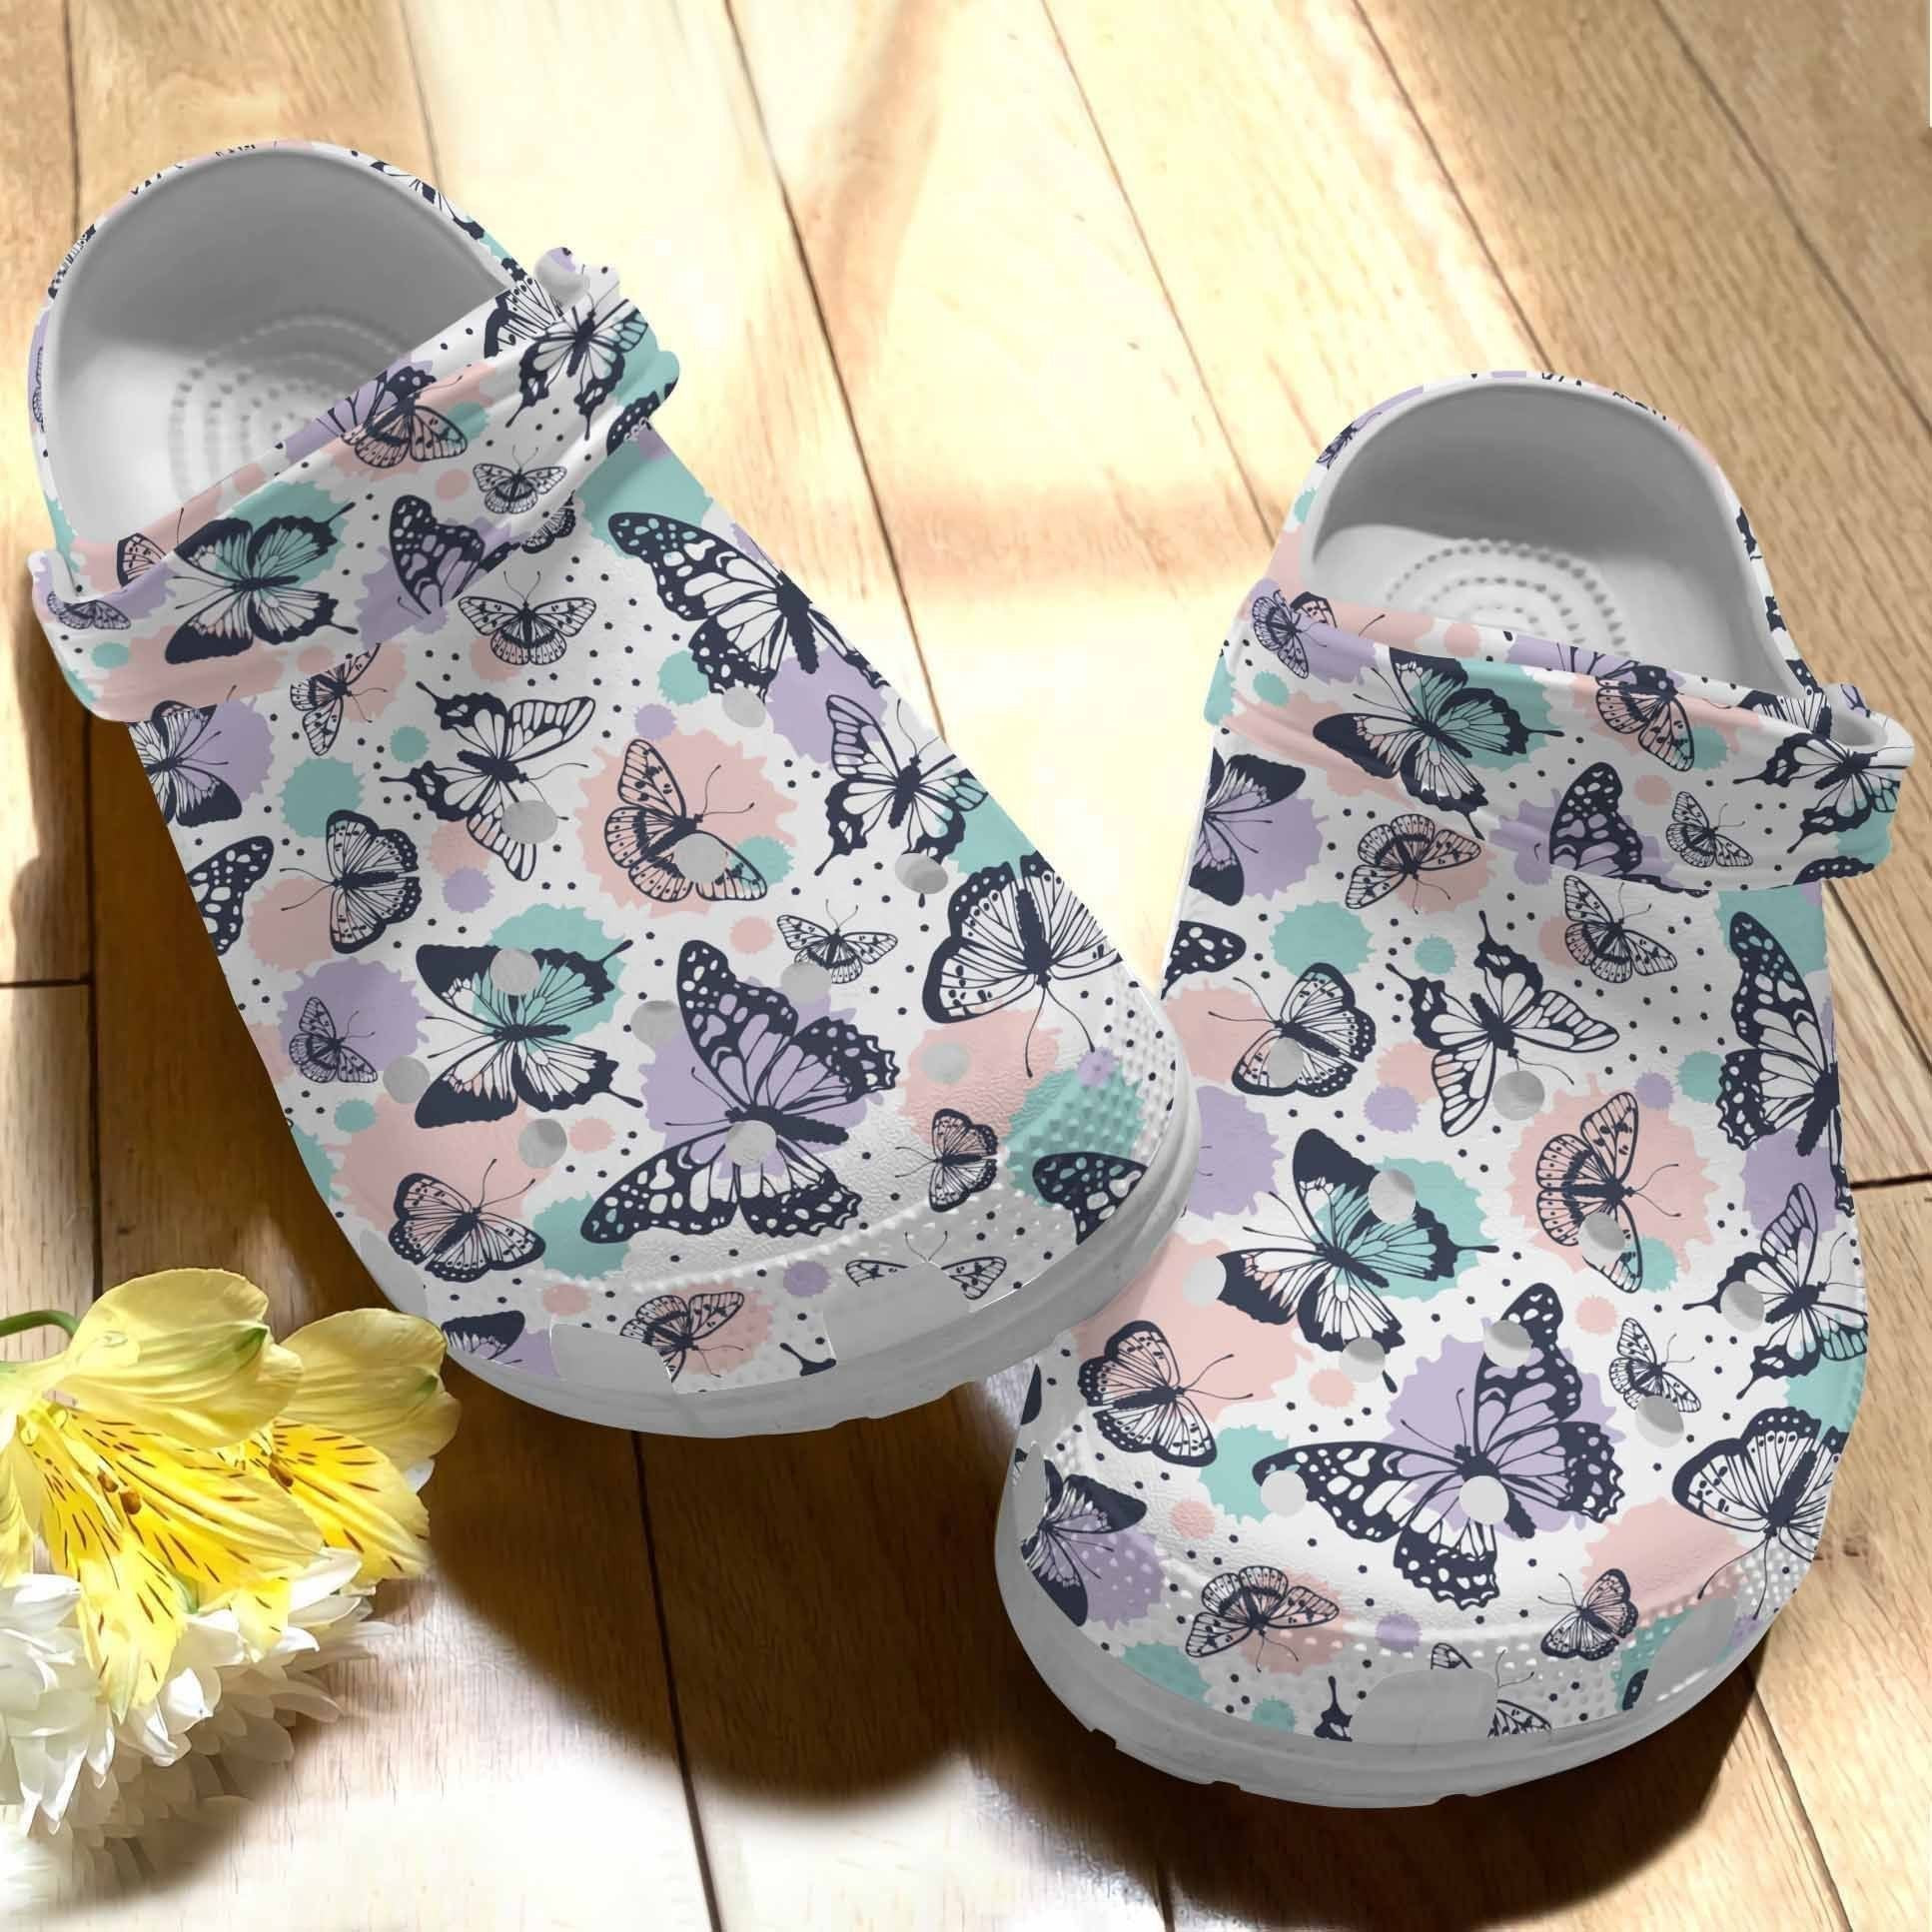 Vintage Butterfly Pastel Crocs Shoes Customize Gift Daughter - Butterflies Crocs Clogs Gift For Birthday Niece - Pinic-Bt2